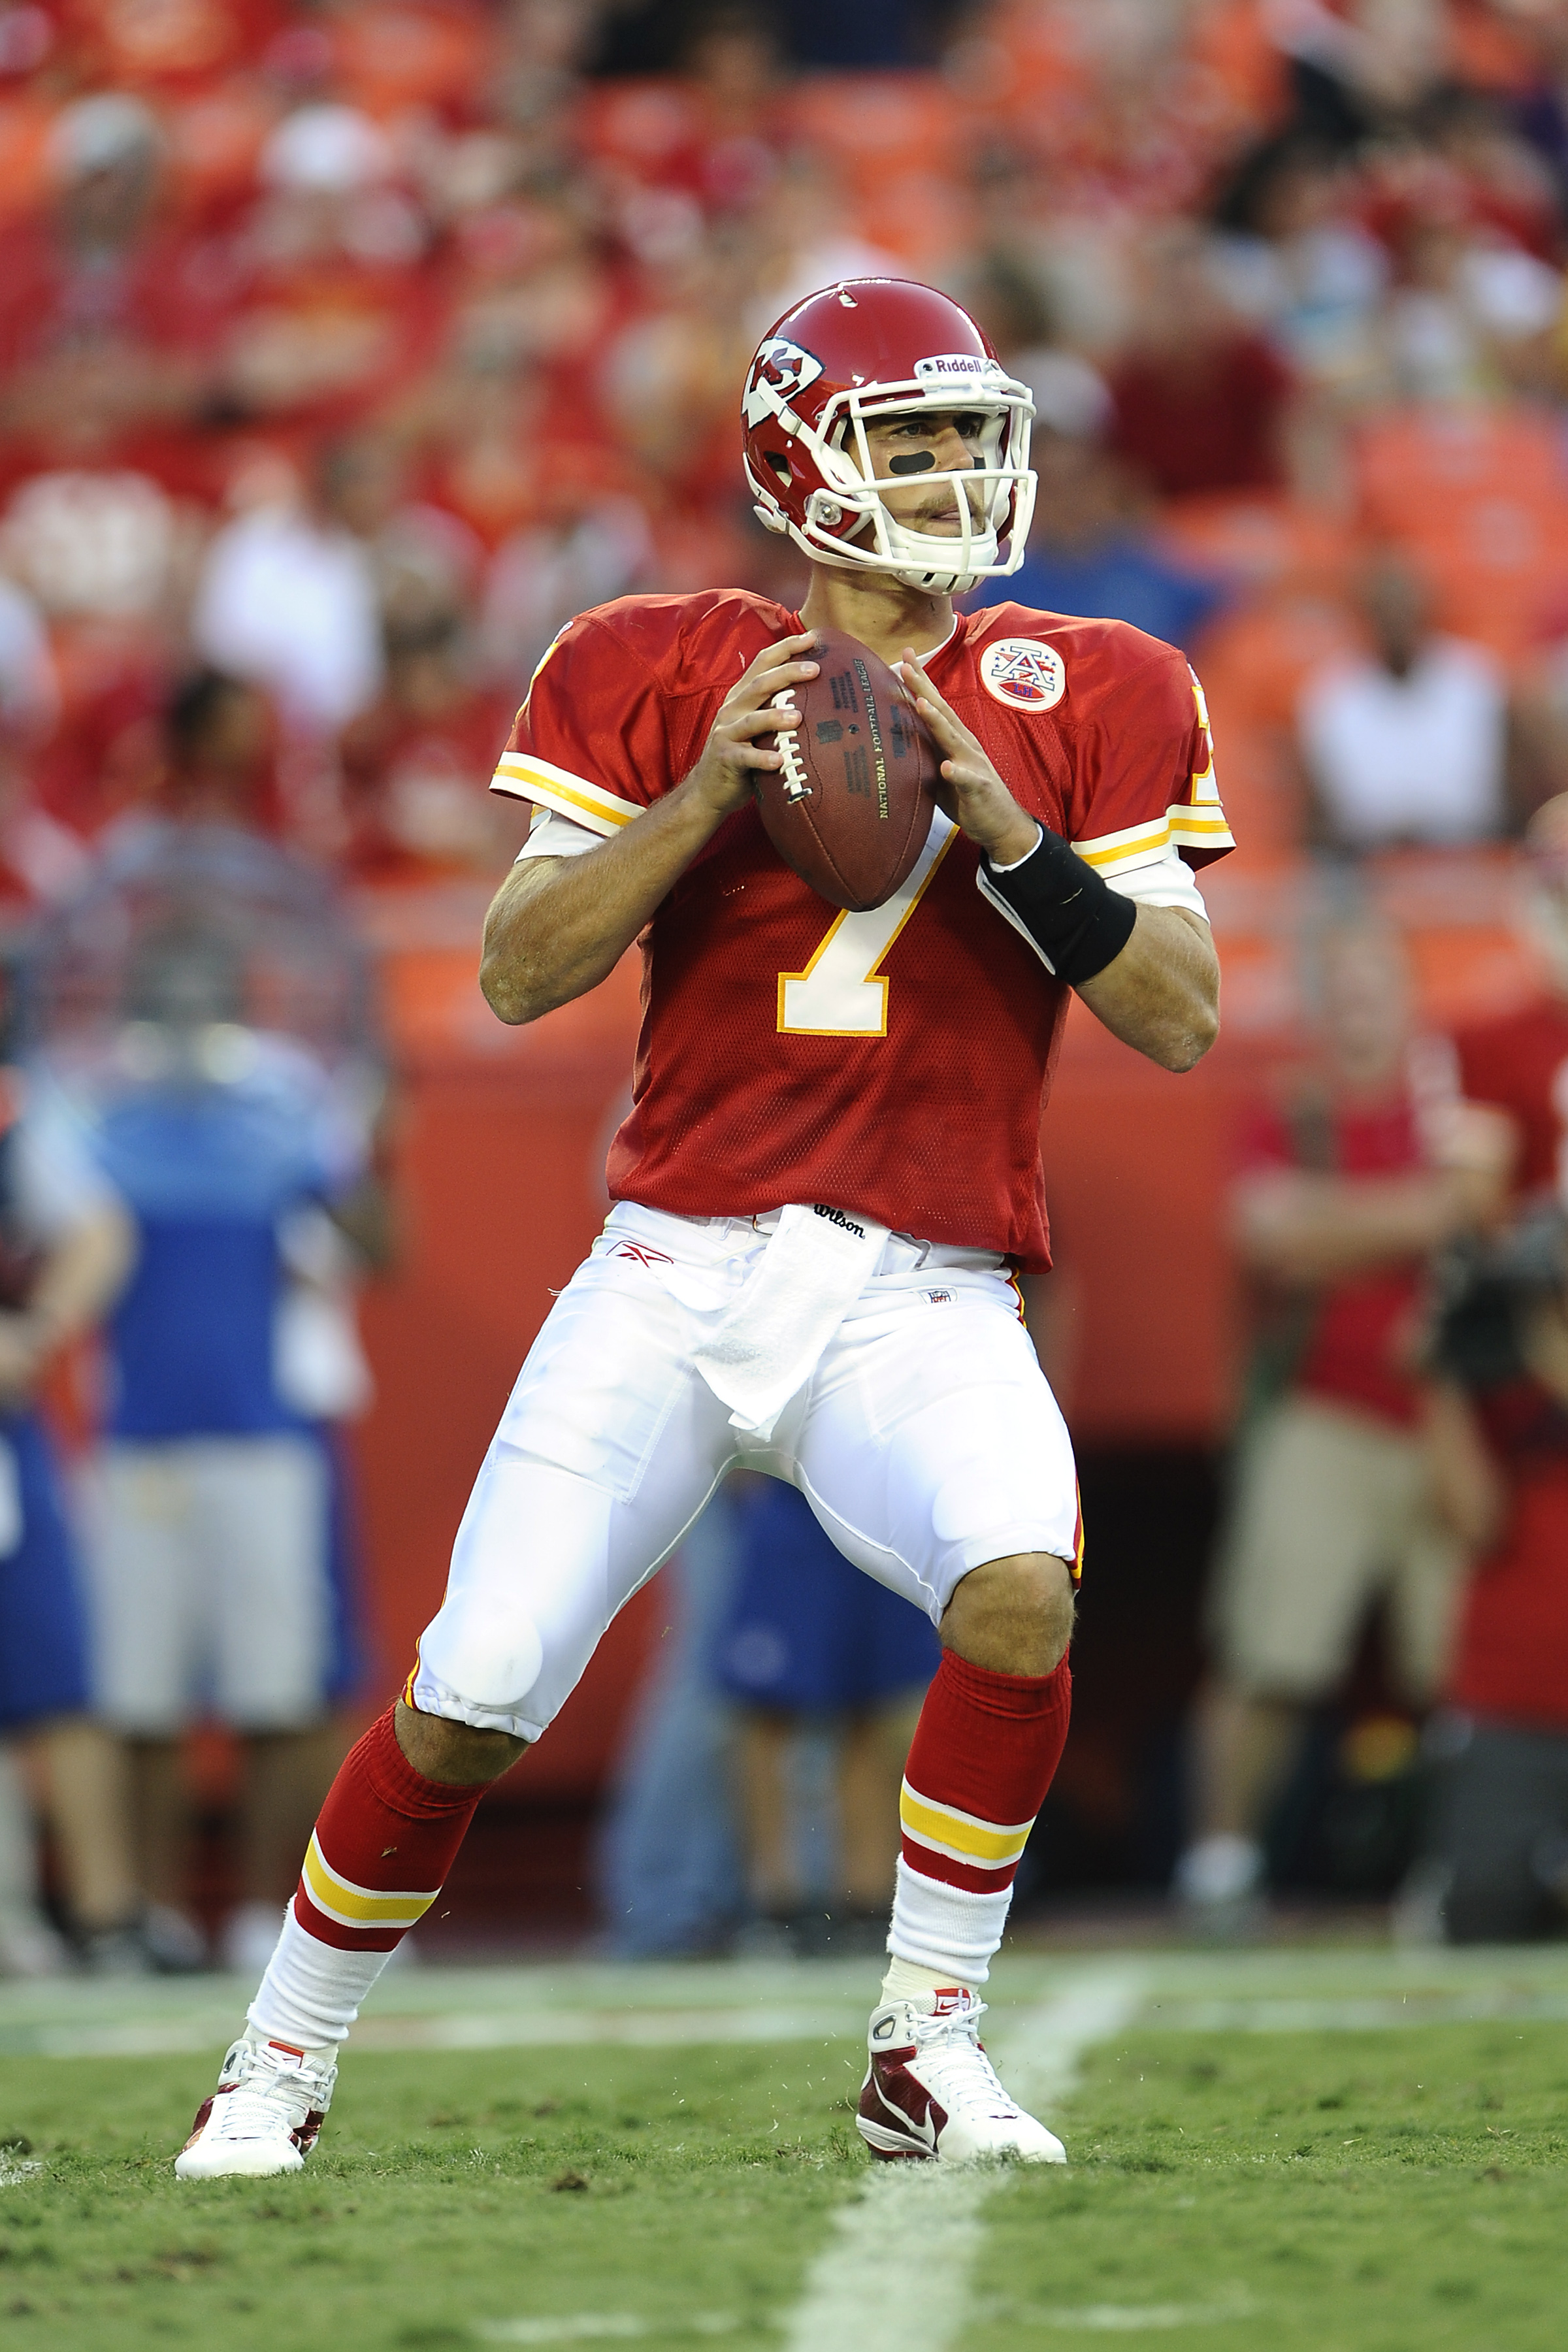 KANSAS CITY, MO - AUGUST 27: Matt Cassel #7 of the Kansas City Chiefs drops back to pass during a preseason game against the Philadelphia Eagles at Arrowhead Stadium on August 27, 2010 in Kansas City, Missouri.  (Photo by G. Newman Lowrance/Getty Images)